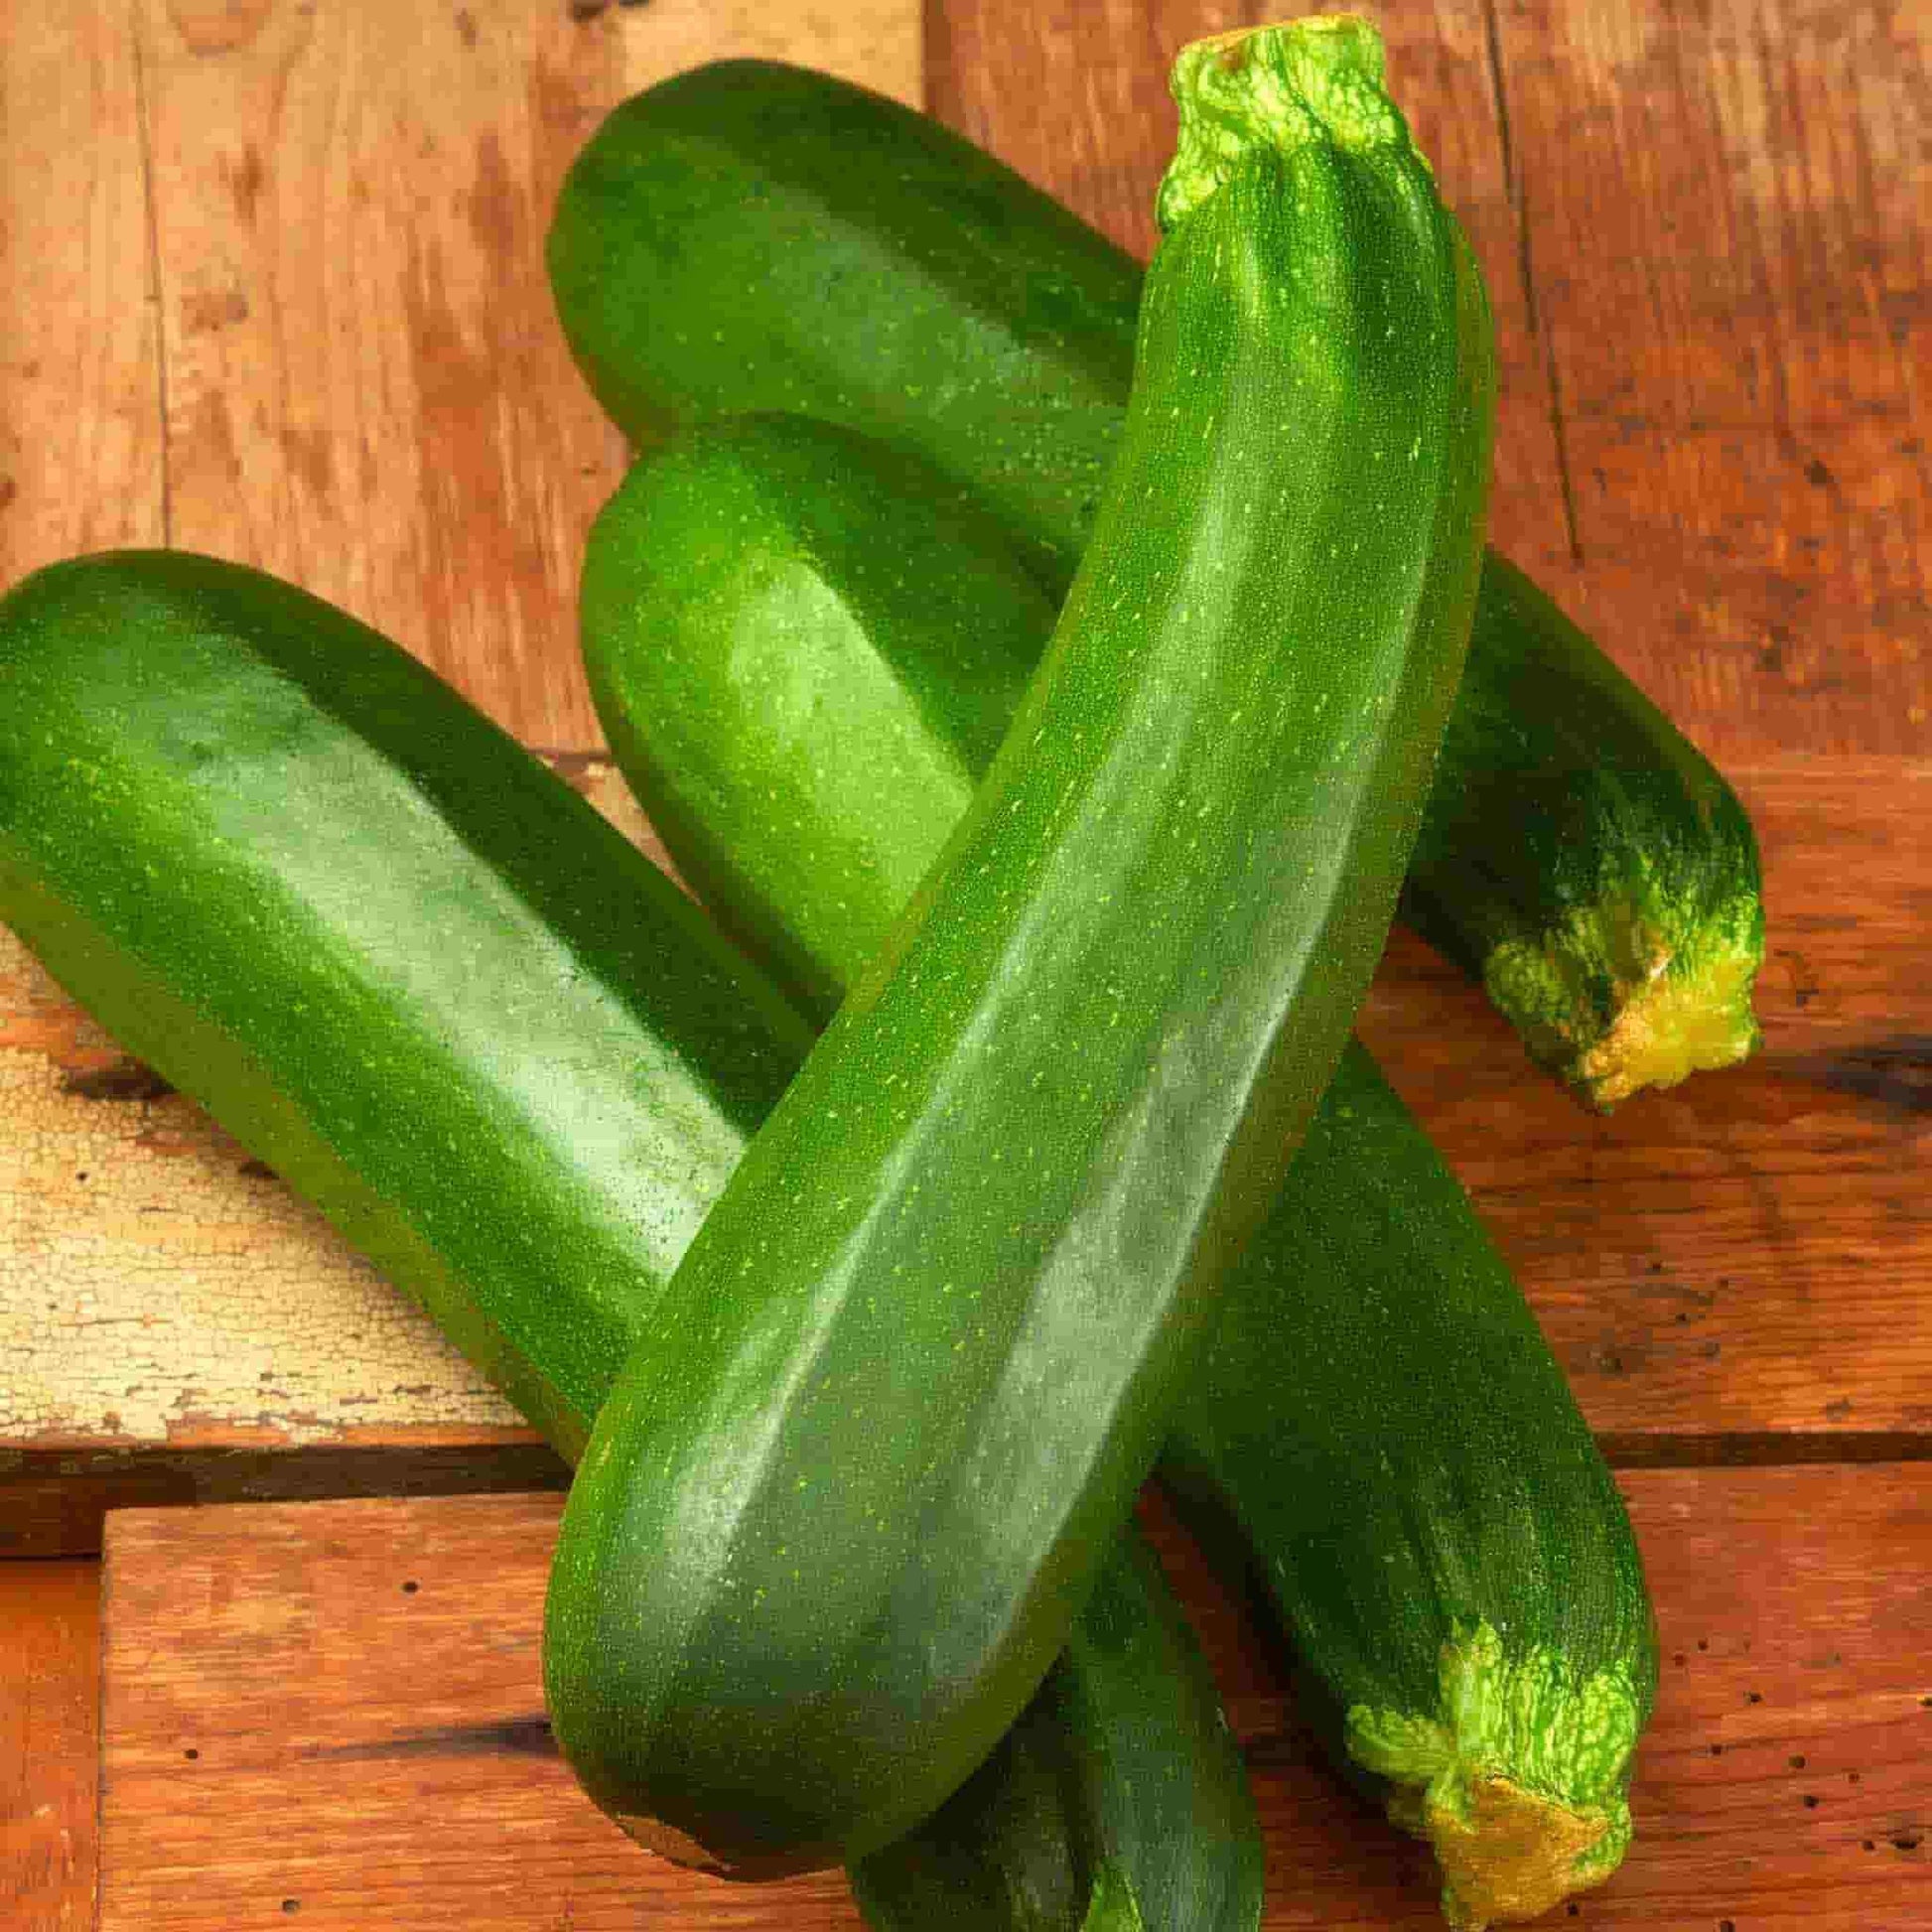 Dark Green Zucchini squash harvested and ready for cooking.